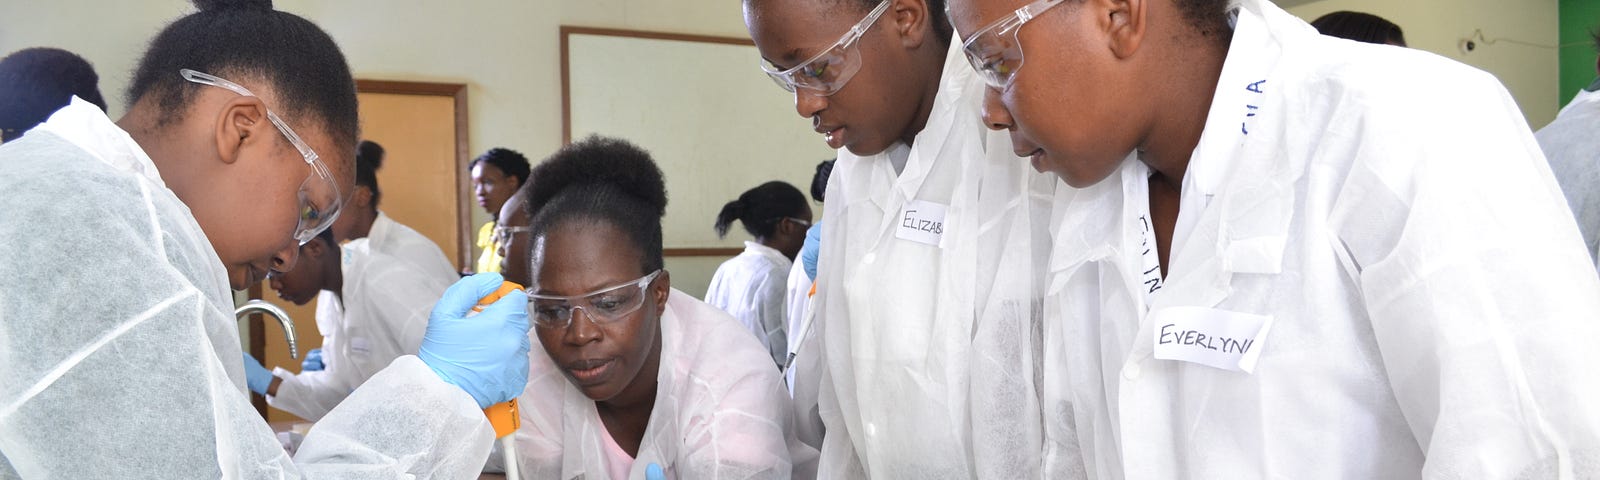 One of four women wearing white lab coats, goggles, and light blue disposable gloves demonstrates a laboratory technique to three of her fellow researchers.